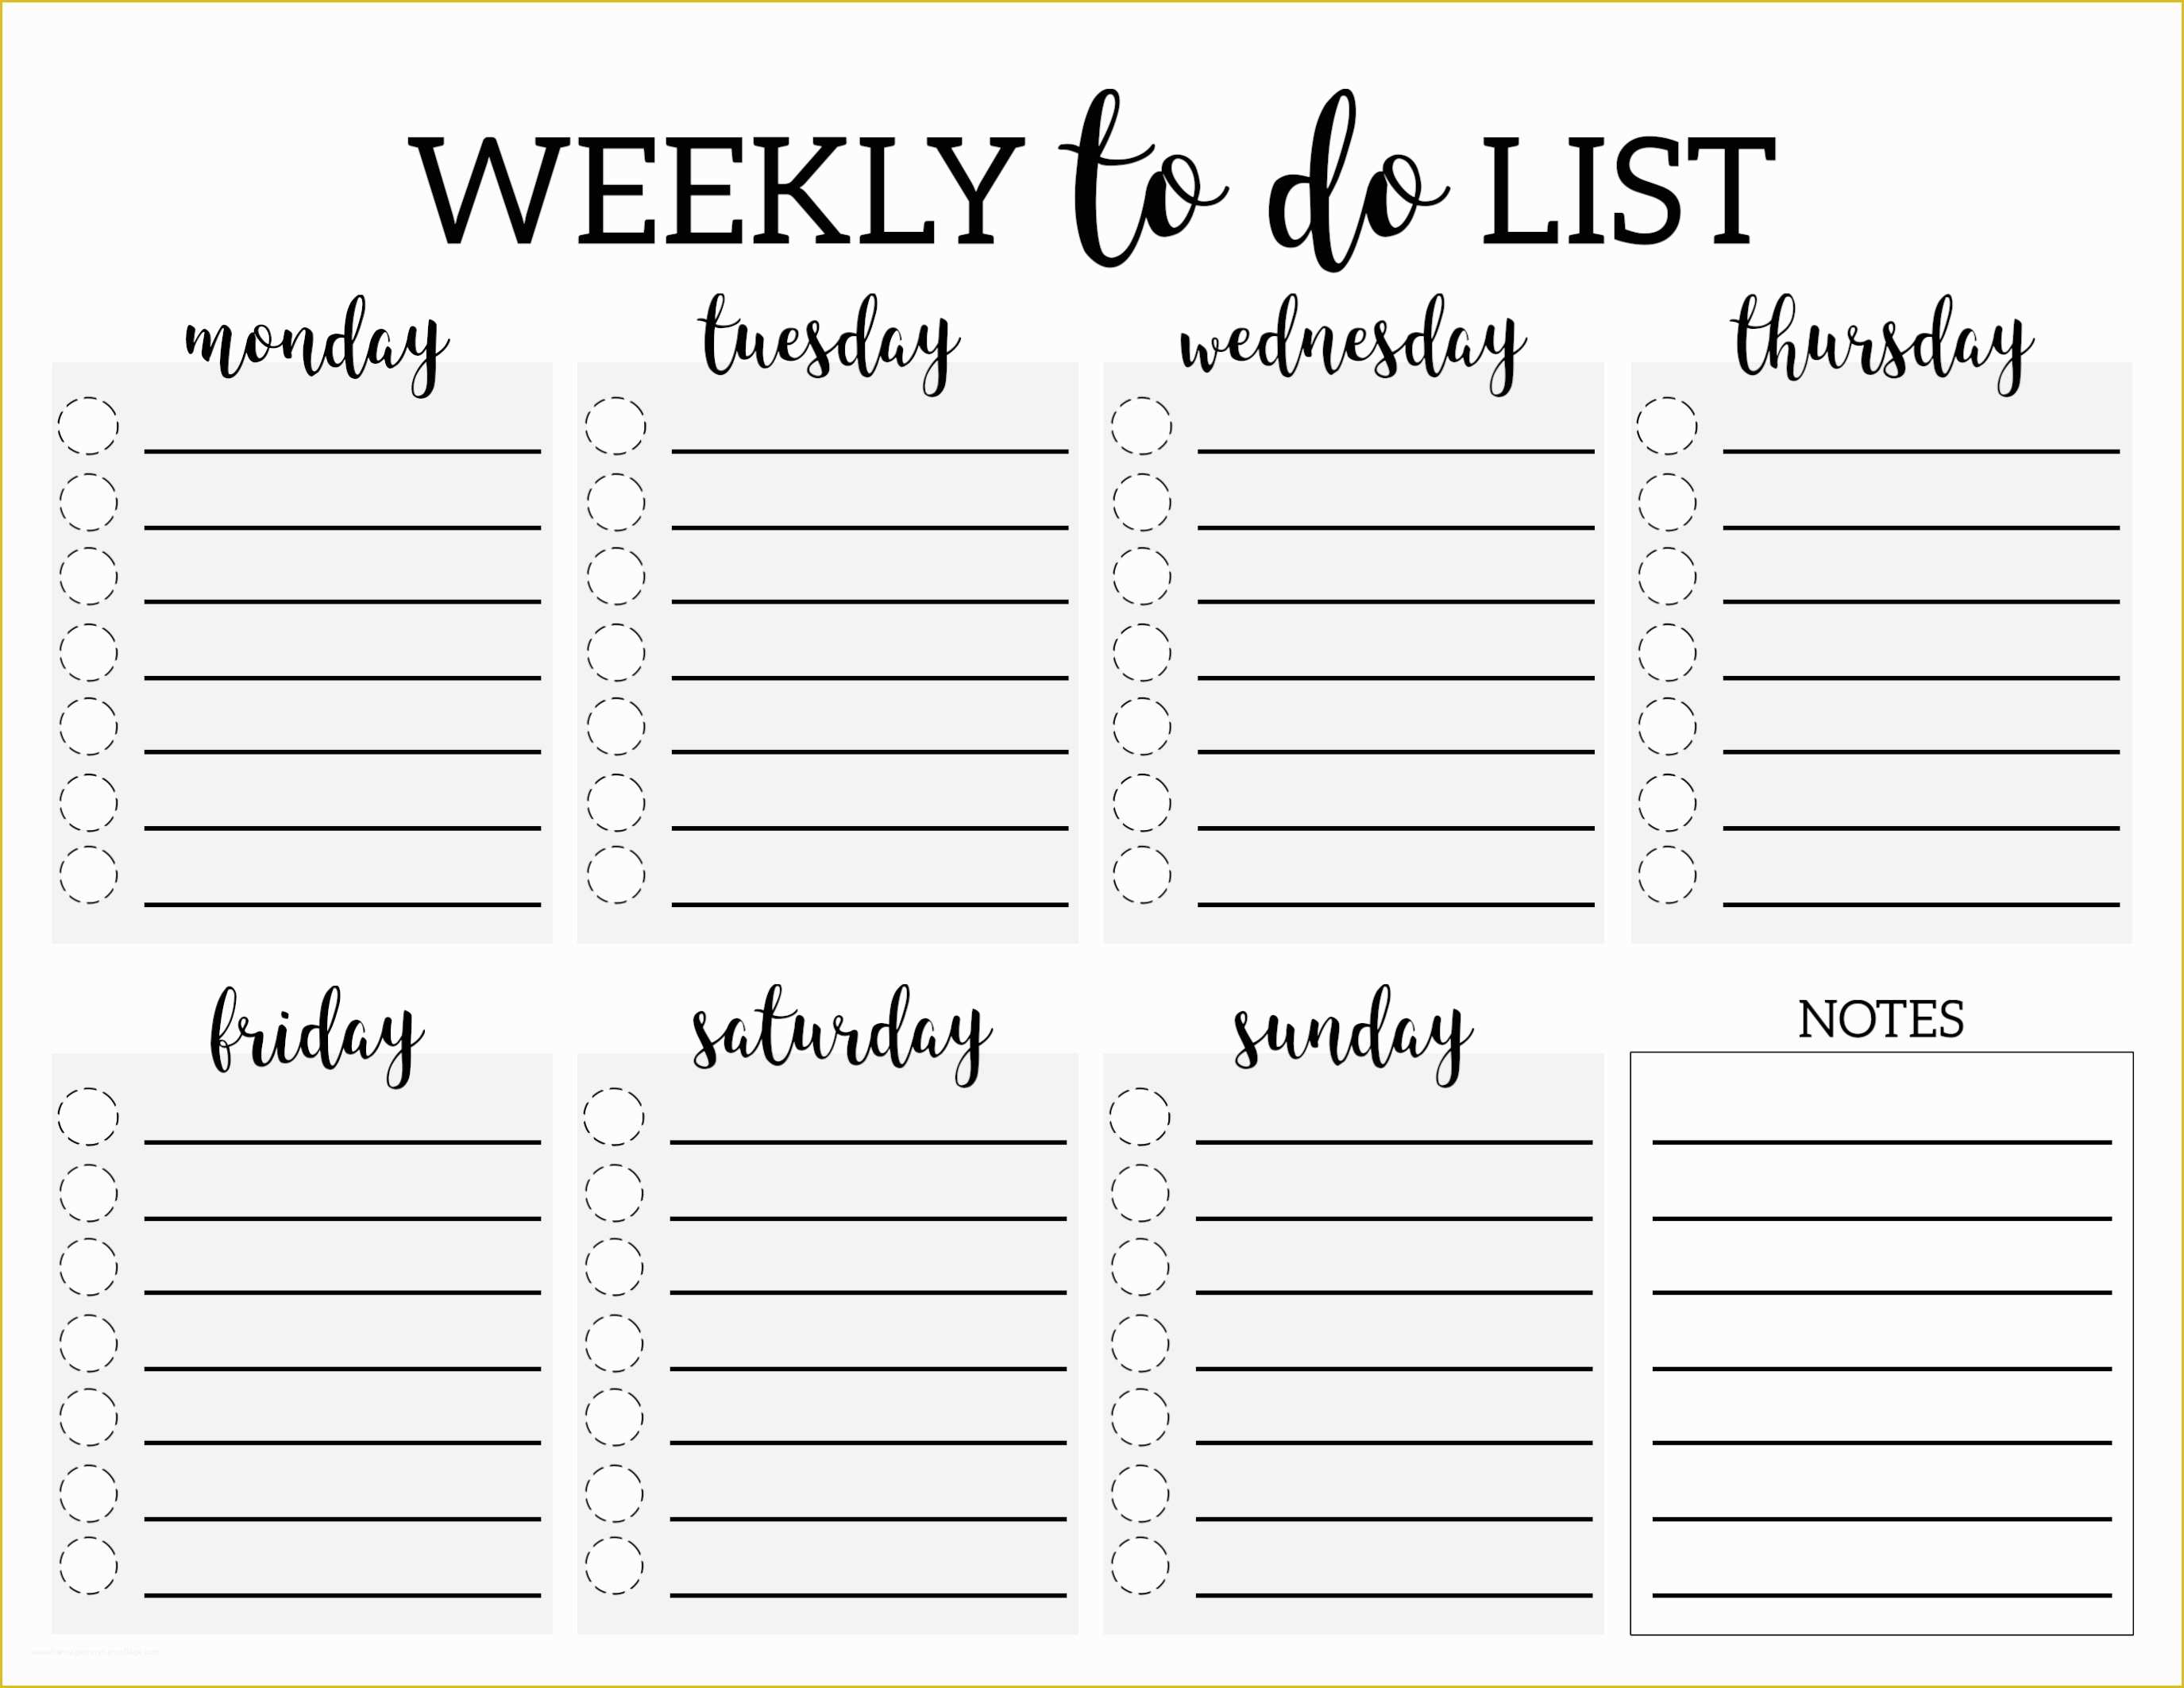 Free Downloadable Checklist Templates Of Weekly to Do List Printable Checklist Template Paper